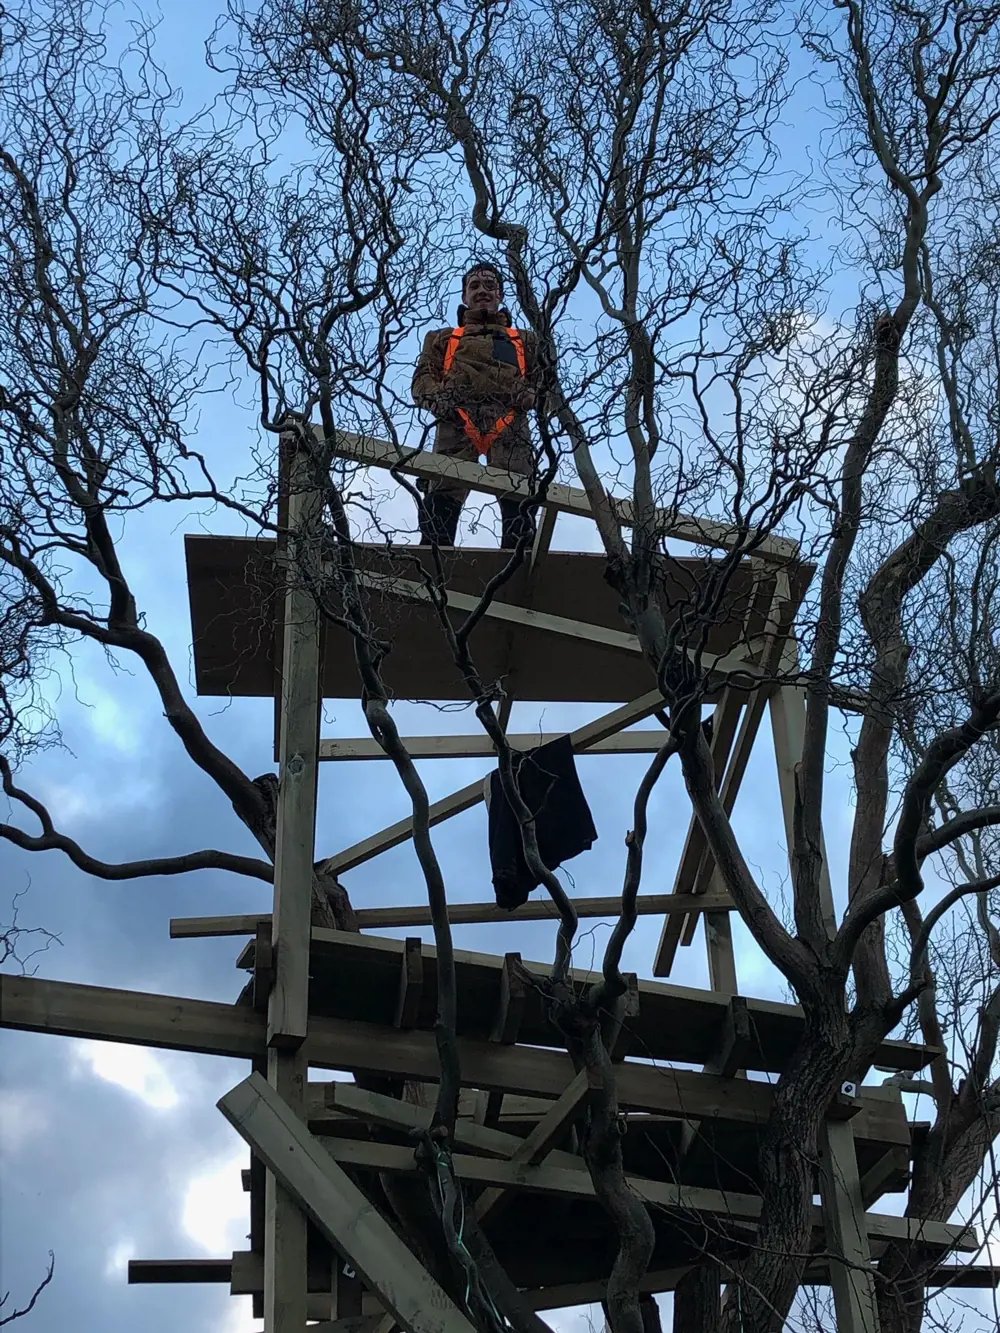 A playground engineer in a high vis jacket, standing on top of a wooden playground installation being built.